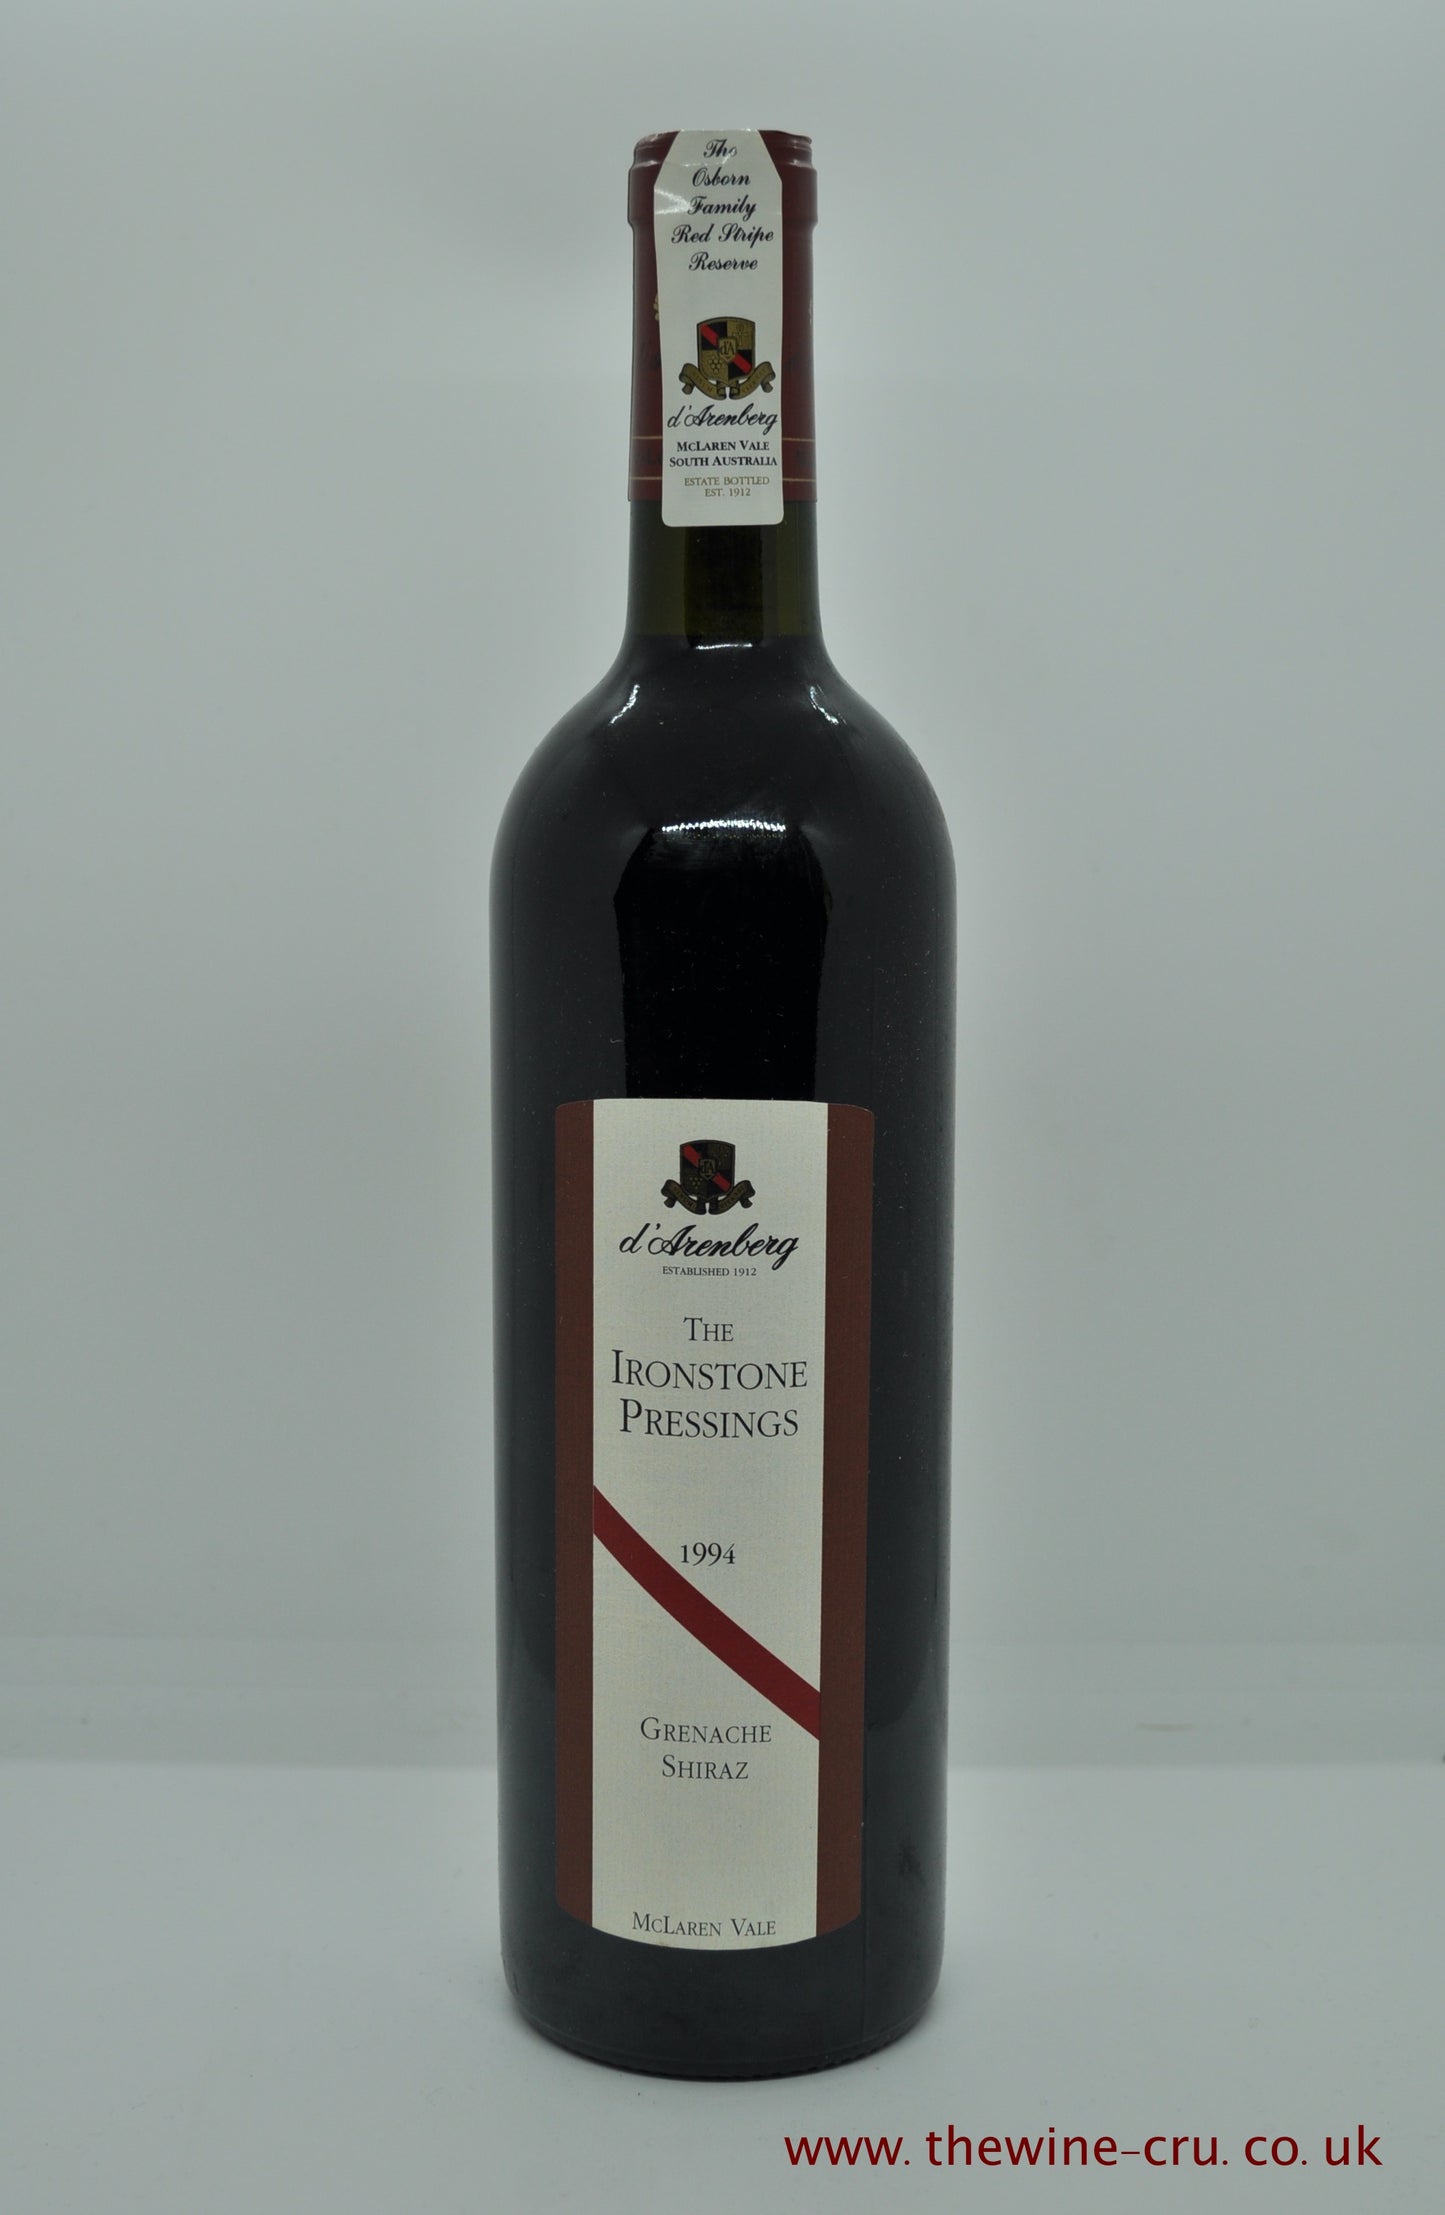 A bottle of 1994 vintage red wine. d'Arenberg Ironstone Pressings 1994. Australia. Immediate delivery. Free local delivery. Gift wrapping available.